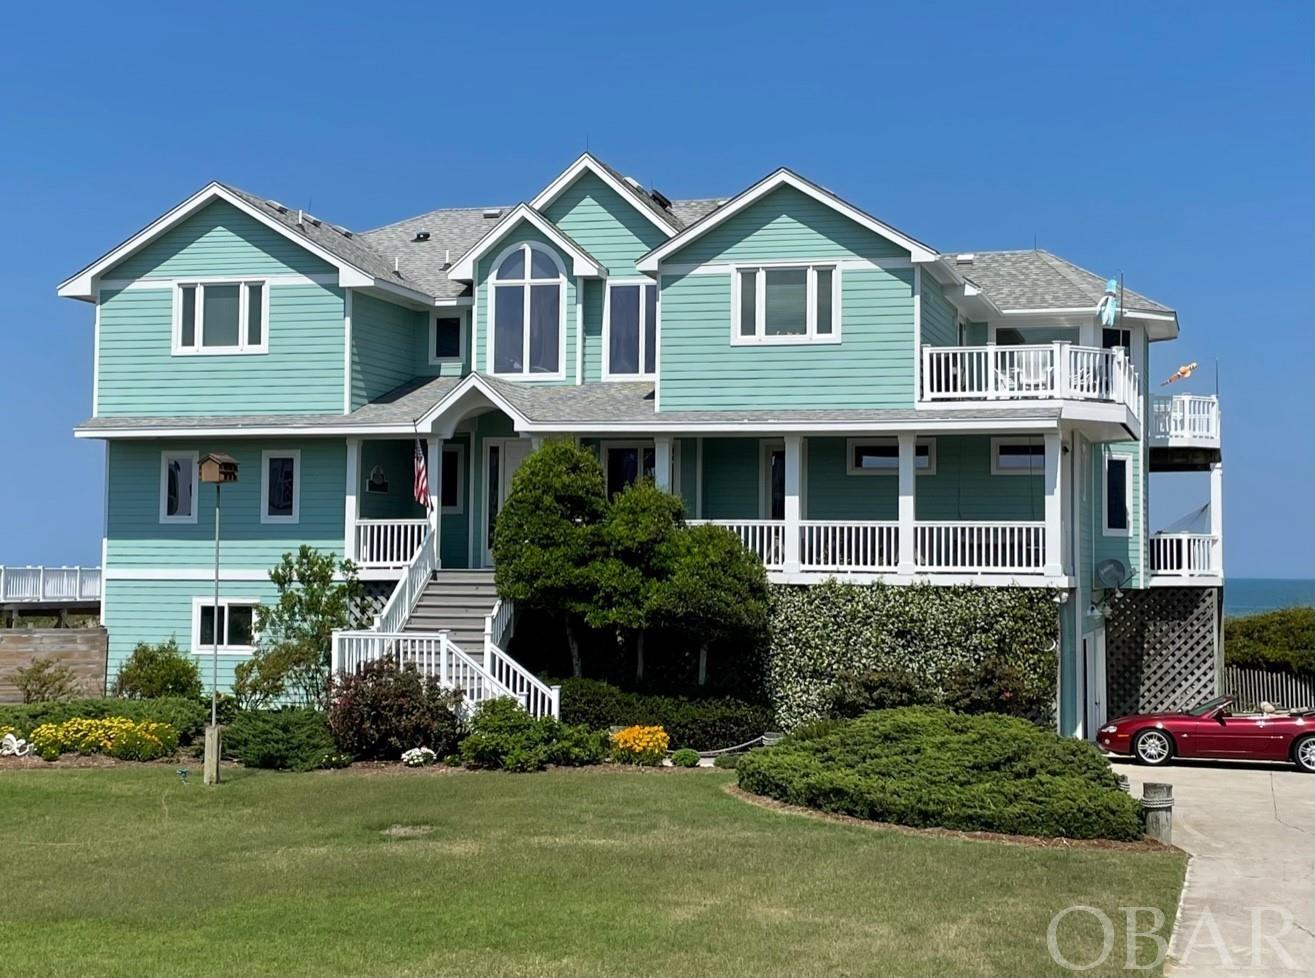 This beautiful custom oceanfront home is designed to maximize ocean, beach & lighthouse views. Located in Ocean Hill with the largest lots & setbacks in Corolla. Ocean Hill’s paved private roads protect owners from on-street parking. Ocean Hill’s restrictive covenants protect one from 9+ bedroom mini hotels being built, like in other areas. An ideal place for homeowners & guests. With just over 5,000 SF of air-conditioned floor space, the dining & sleeping areas accommodate up to 14 guests comfortably.  You enter the home from the spacious covered front porch, complete with double swing and sitting area. The entry door opens to a large oak-floored family room. Four large windows provide your first views of the wide dune and the ocean beyond. This large family room serves as a daytime game room & Dolby Atmos surround-sound theater after dark.  Ascending the open staircase to the top level reveals the great room with spectacular panoramic ocean views of the full coast from north to south. The great room’s granite fireplace surround and oak mantle are framed by custom oak shelving & second surround-sound video system. The open floor plan flows to a large dining area with views of the Ocean & Currituck Lighthouse. This is adjacent to the spacious modern kitchen with cook island that opens to the lighthouse deck for outdoor grilling & dining with sunset & lighthouse views. The great room also opens to a large oceanside deck to watch the sunrise.  The upper-level owner suite has two sitting areas: one in front of four large oceanfront windows, for enjoying the ever-changing views of sea and sky; the second faces the fireplace & TV for a relaxing private evening. This suite features two walk-in closets/dressing rooms & a large custom tiled bathroom with spacious shower area & a separate heated Jacuzzi tub. The well-lit area features two vanities & a hidden laundry chute.  The mid-level offers separate accommodations. To the north is a large king bedroom with sitting area & ensuite bath. Next is a four-bed bunk room. The north side also has a combined laundry/ craft room with desk area, built-in cabinets, full sink & closet storage.  The south side has an oceanfront king bed suite with walk-in closet & Jacuzzi tub; plus ocean views & deck access. The mid-level deck has a large hot tub & a shaded hammock with ocean & Lighthouse views.  Across the hall is a queen bed suite that opens to a covered front porch with porch swing & seating with great sunset & lighthouse views.  The first level as an extended family suite, is currently used as an office.  It features a king sofa bed, office table, ensuite bath and mini kitchen with fridge & wet bar. The enclosed garage area has room for two cars, plus a large play area & a work/ storage room. An elevator allows easy access from these areas to both the mid & upper levels.  All floors have deck access to a walkway over the dune and stairs to the beach.  The large beach deck is great for entertaining or relaxing off the sand. There is even room for a swimming pool within the CAMA guidelines if desired.  After a day on the beach or a night in the hot tub you can rinse off using the walkway shower or the two private outside hot and cold showers. The nicely landscaped front yard is perfect for lawn games. Below the lawn, the septic system can be expanded to the Ocean Hill 8-bedroom limit. The driveway & garage has parking for at least 8 cars.  This home was built to last. The home’s foundation is secured by more than 40 telephone pole pilings extending 20 feet below ground.  In 2010 an expansion & remodel for full-time residency was done; including total upgrade of plumbing, HVAC systems, windows, roof, decks, siding, interior floors, finishes & appliances. The home exterior was painted in 2021 and it has been very well maintained by the resident owner. Projected 2024 rental Income Advertised Rates: $162,932; w added Private Pool: $229 ,019. With 8 Bedrooms: Projection is $277,767.